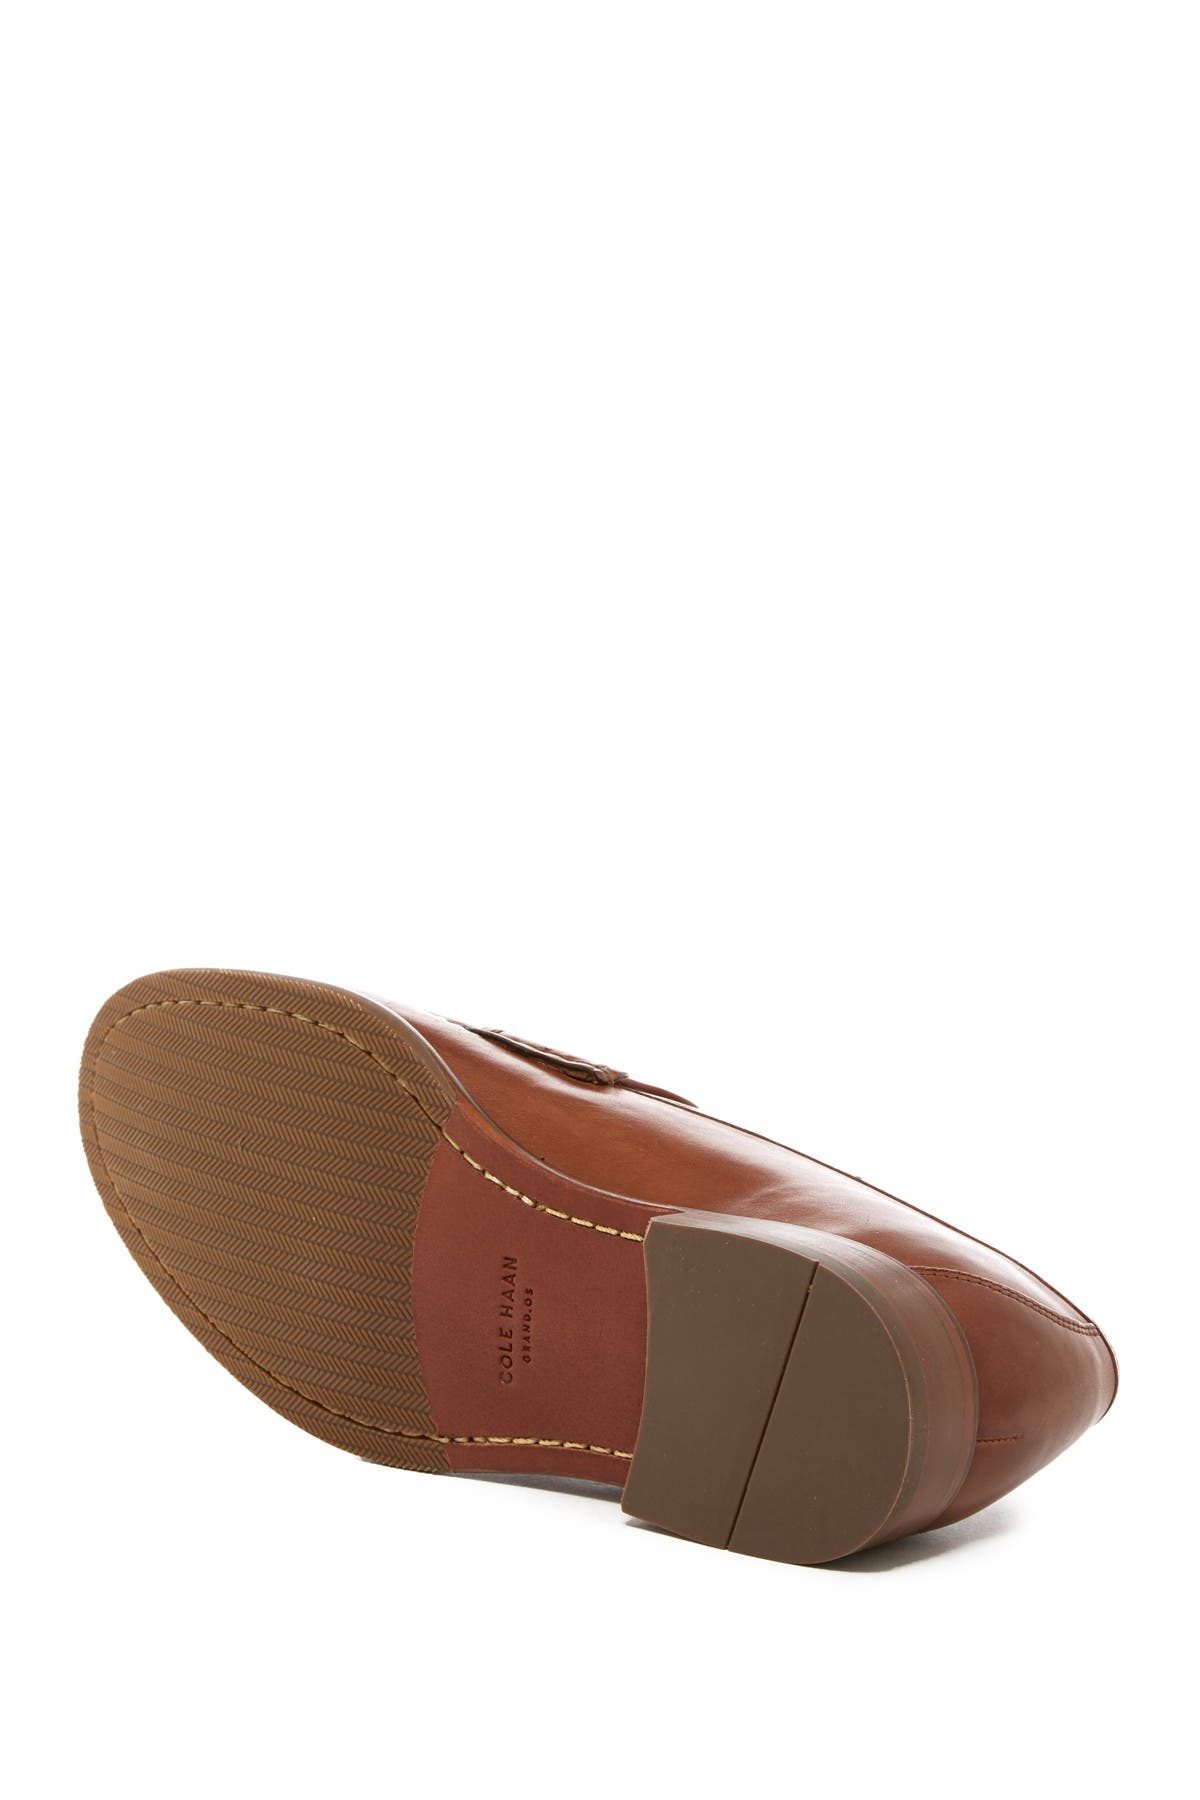 Cole Haan | Aiden Grand II Penny Loafer 